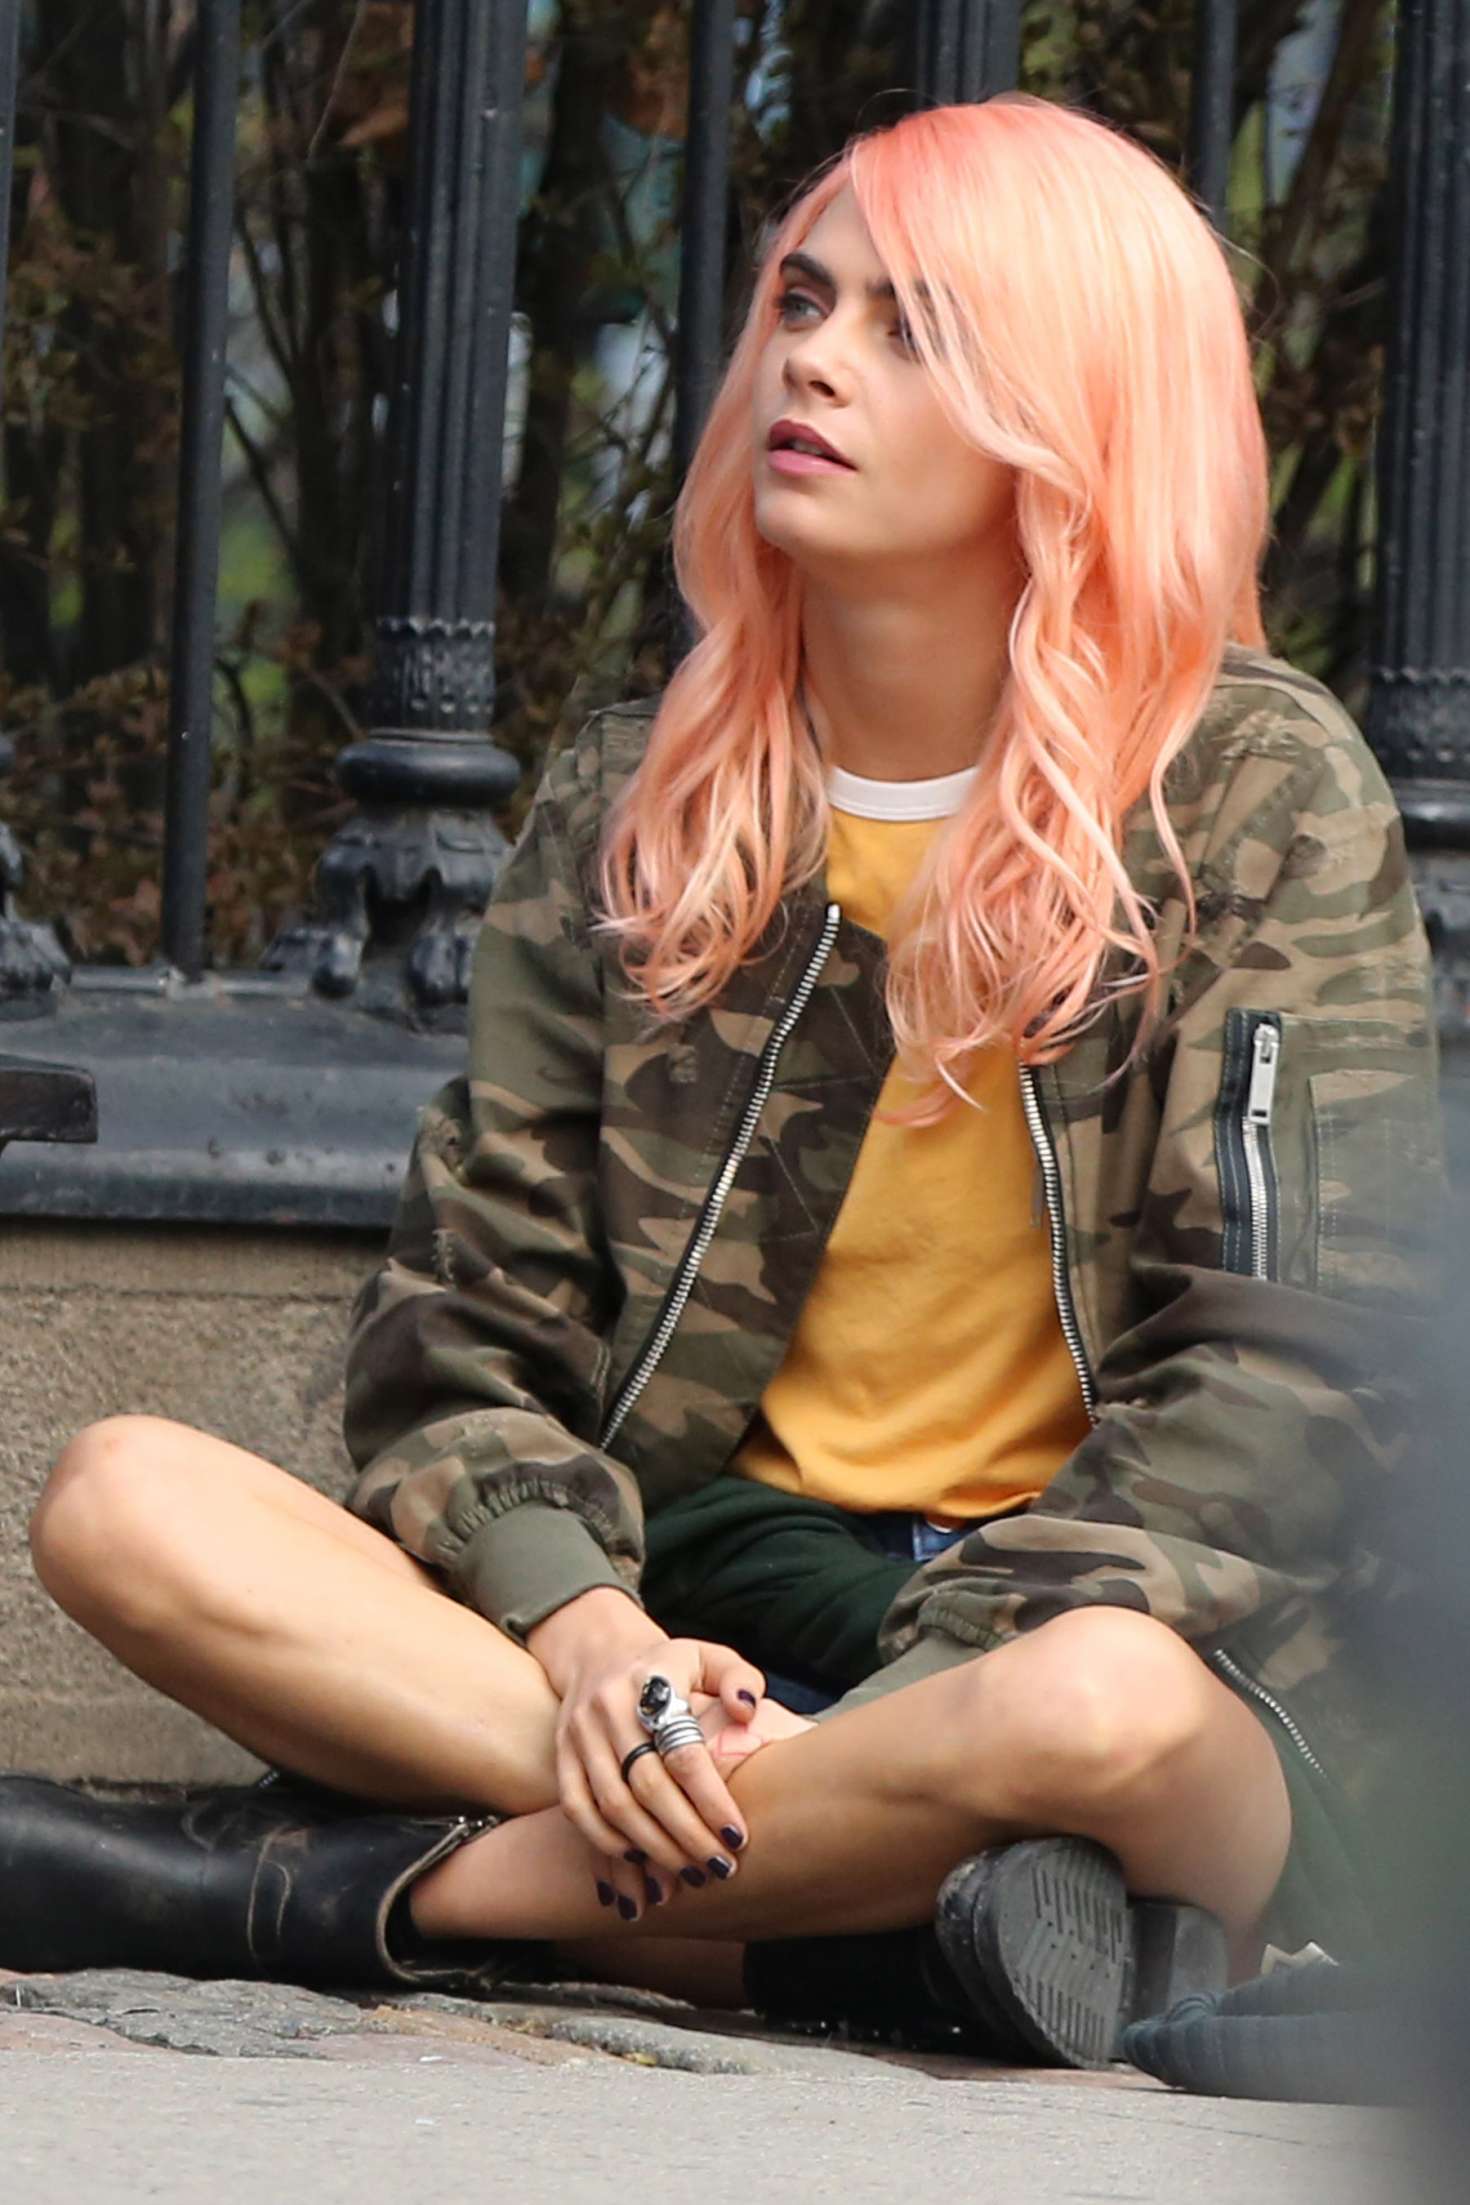 Cara Delevingne Filming 'Life in a Year' set in Toronto